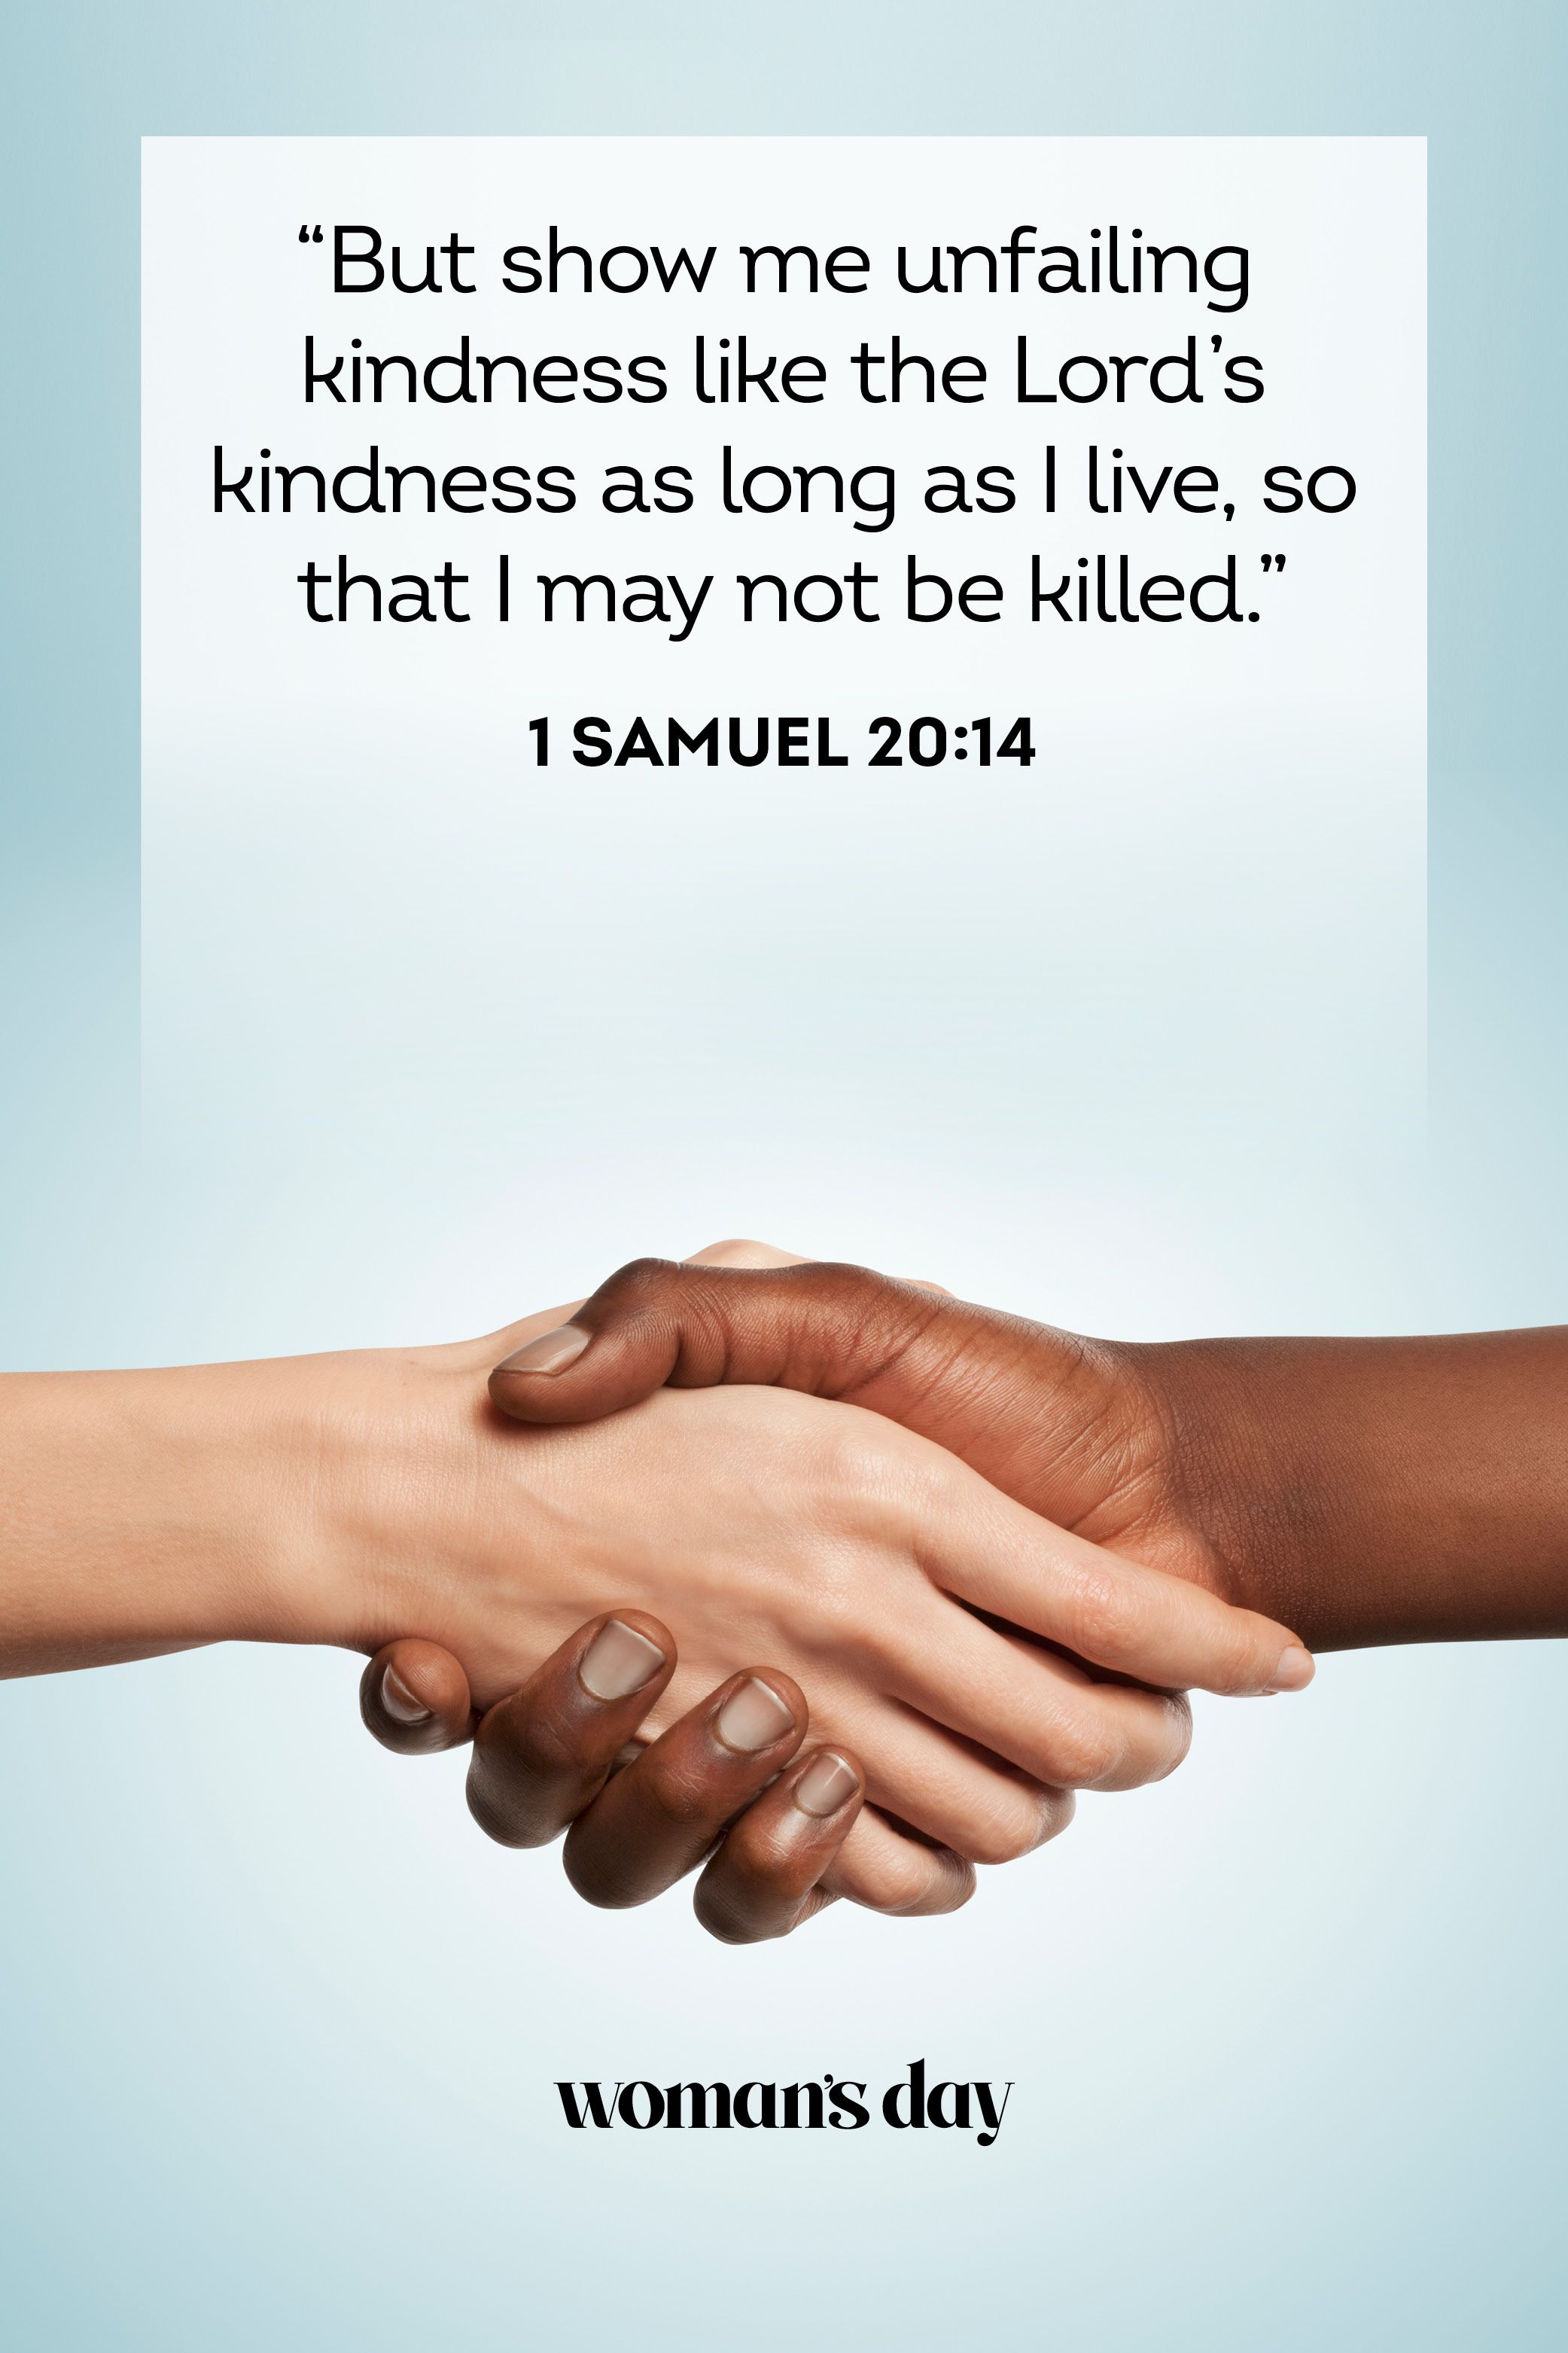 40 Bible Verses About Kindness and Compassion for Others